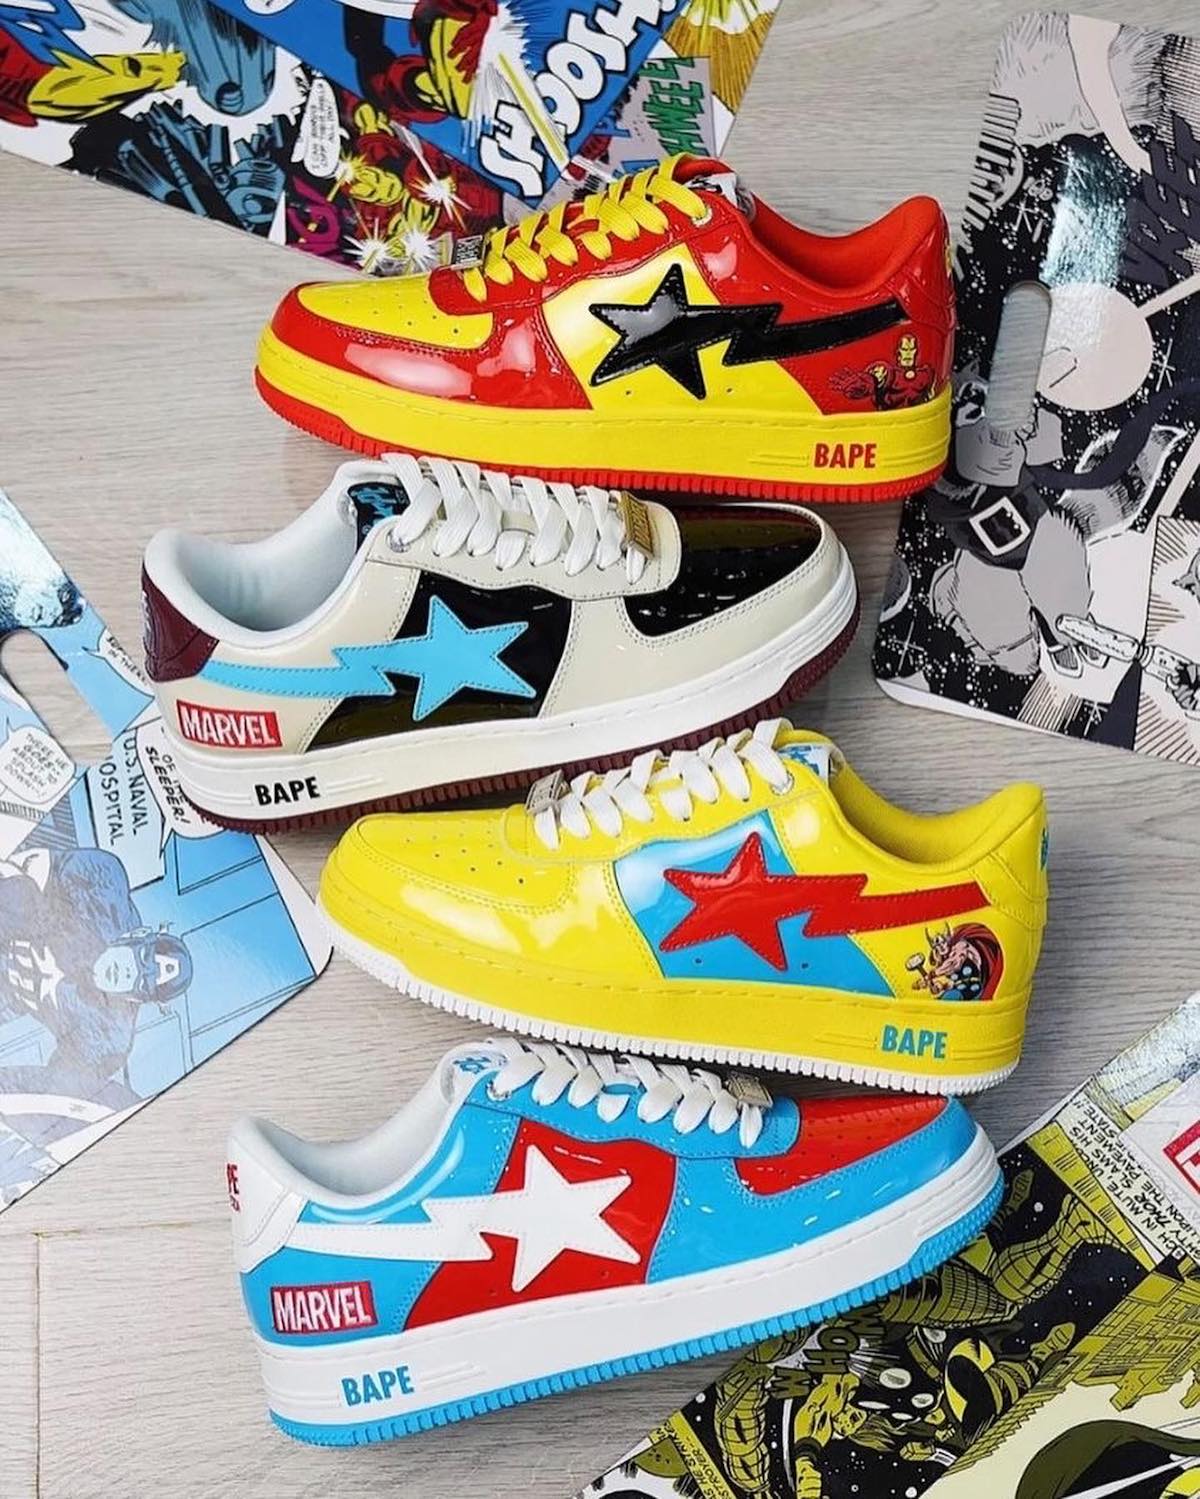 Marvel x Bape Sta 2022 Collection Release Date + Where to Buy 